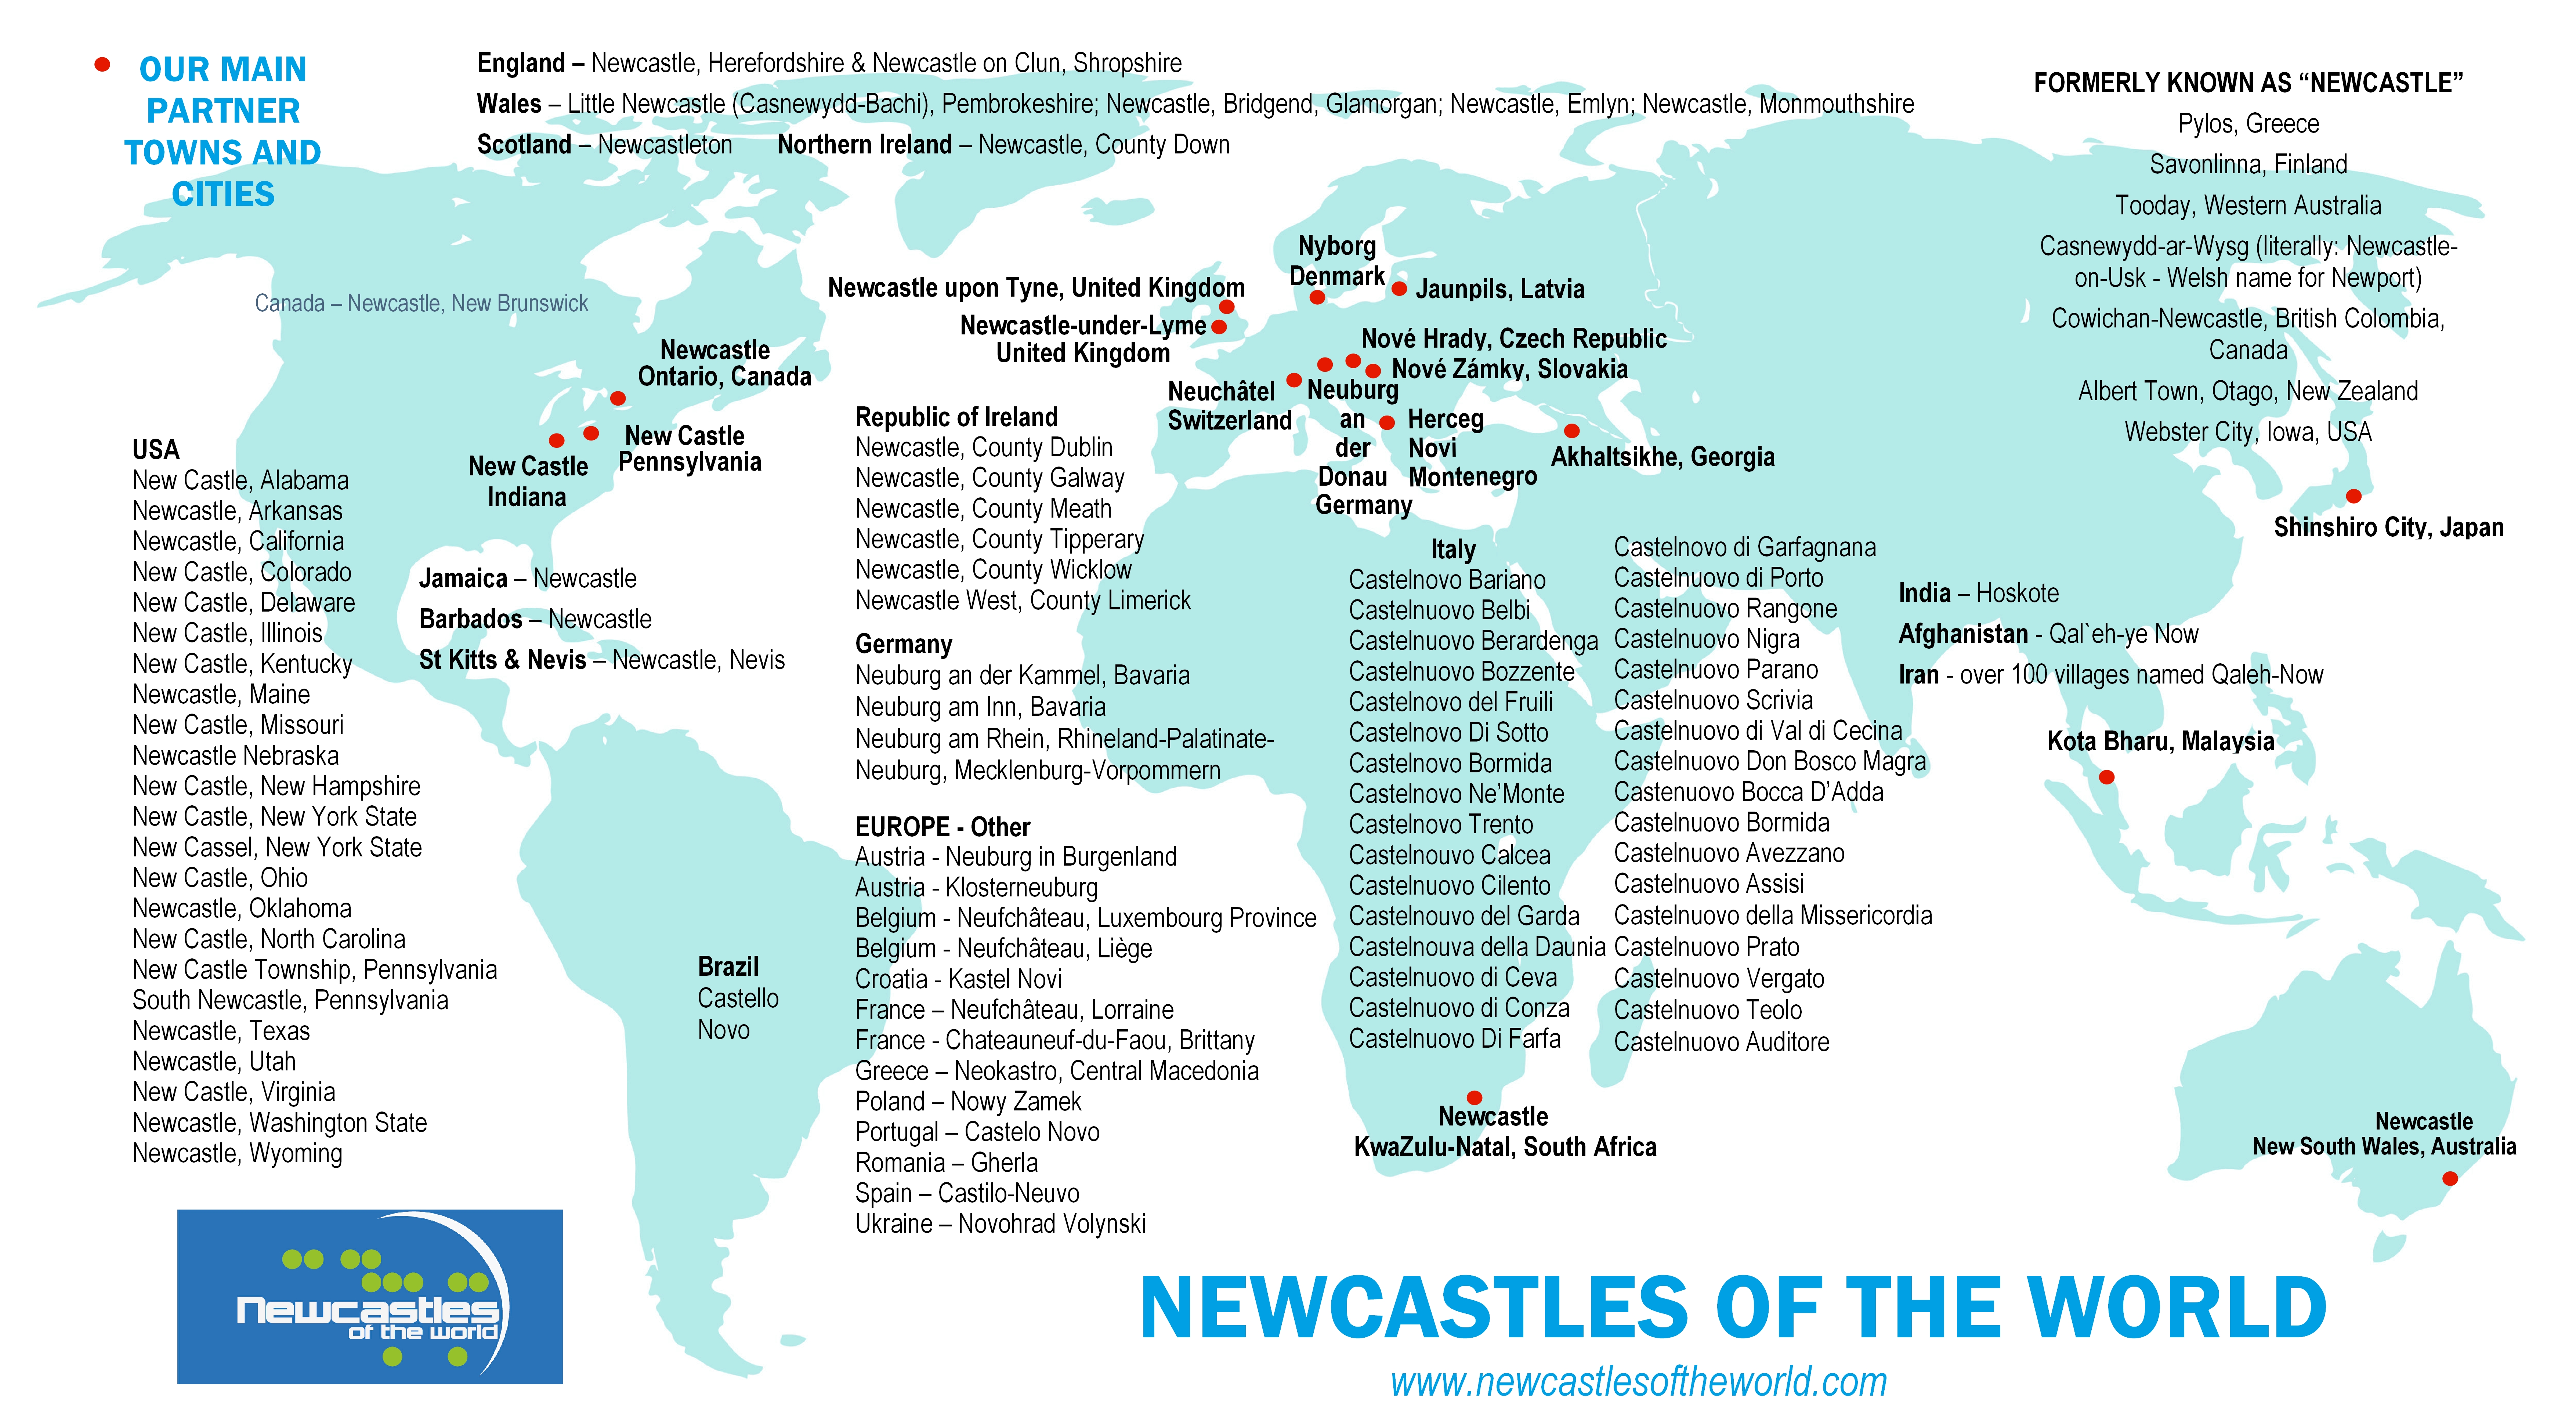 Newcastles of the World map 2019